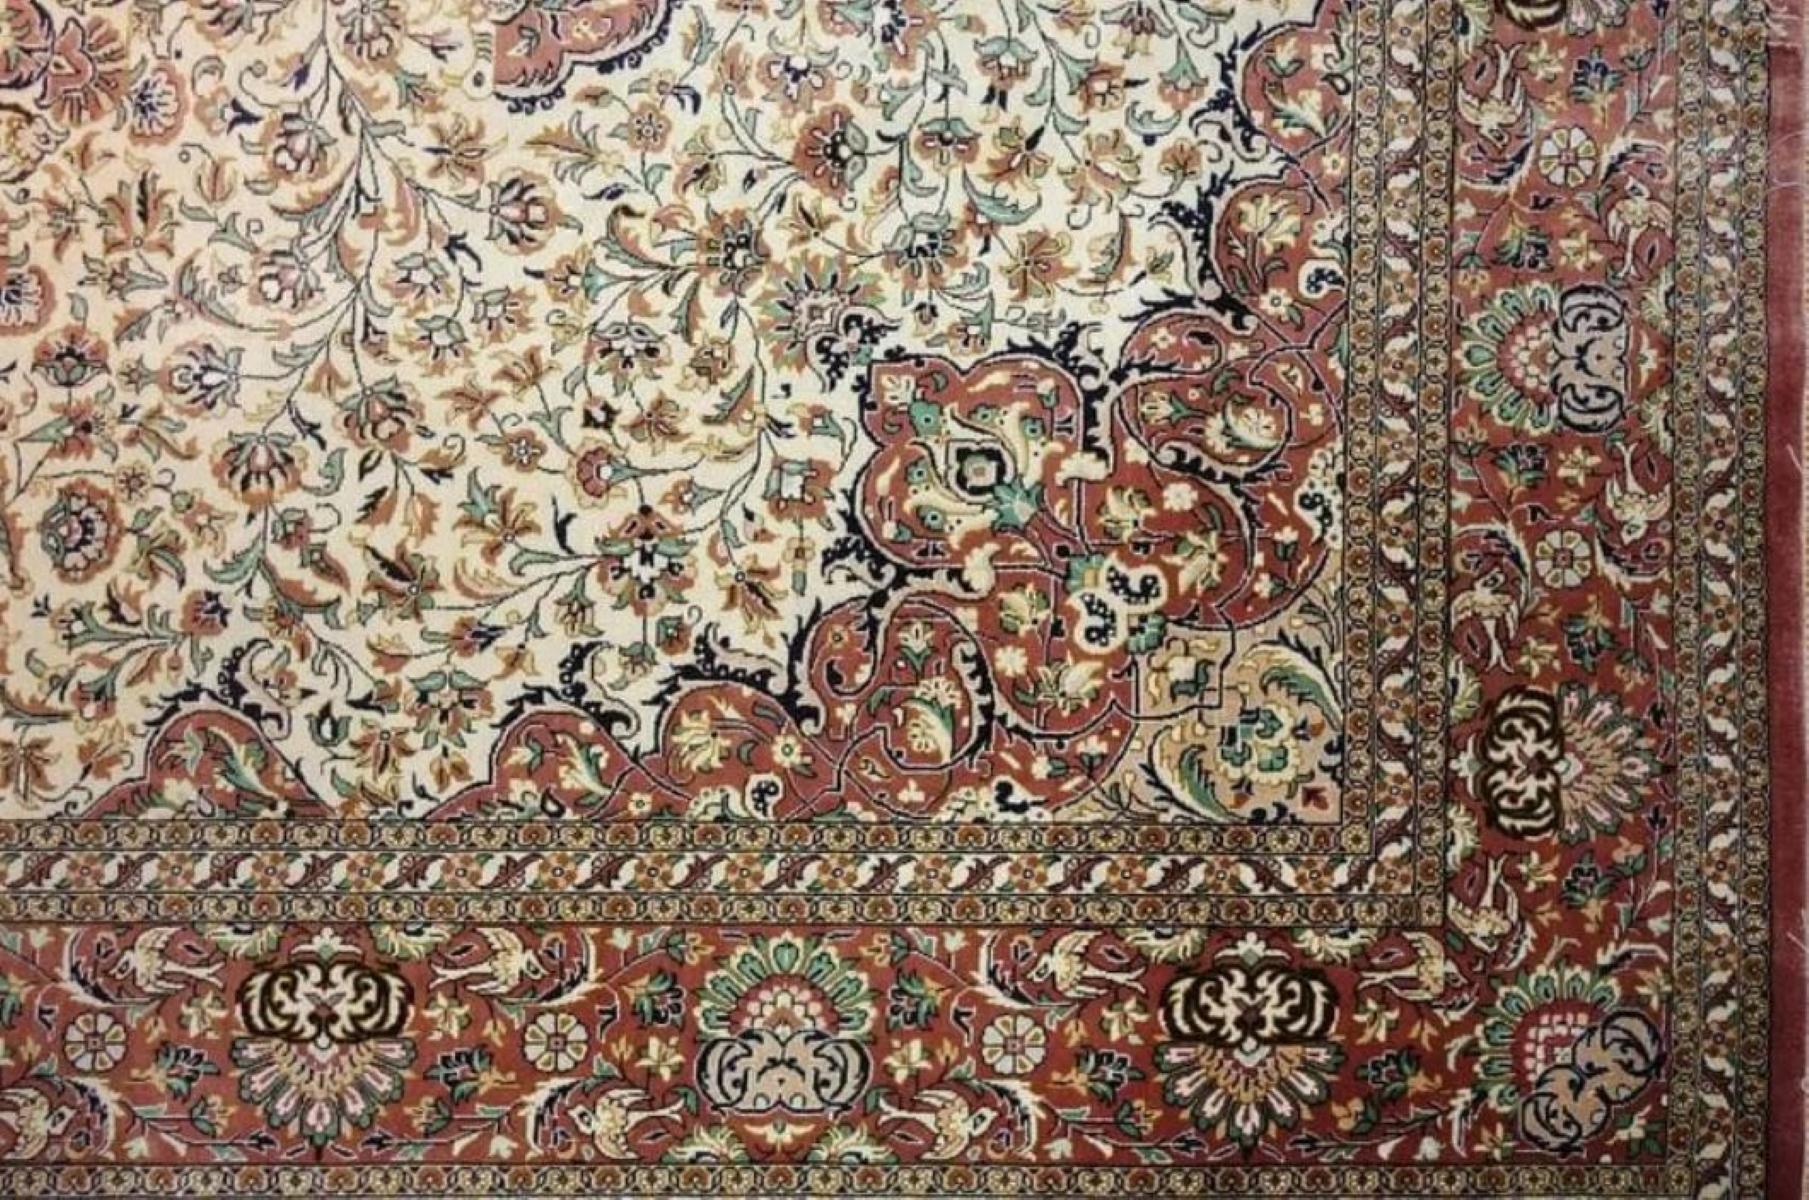 Very fine Persian Rug Qum 700 Knots per inch, Size 7.10 x 5.2 Iran Qum Mahlosi Silk and Silk foundation. Around 4,000,000 knots tied by hand one by one. It takes 3 years to complete this piece of art.